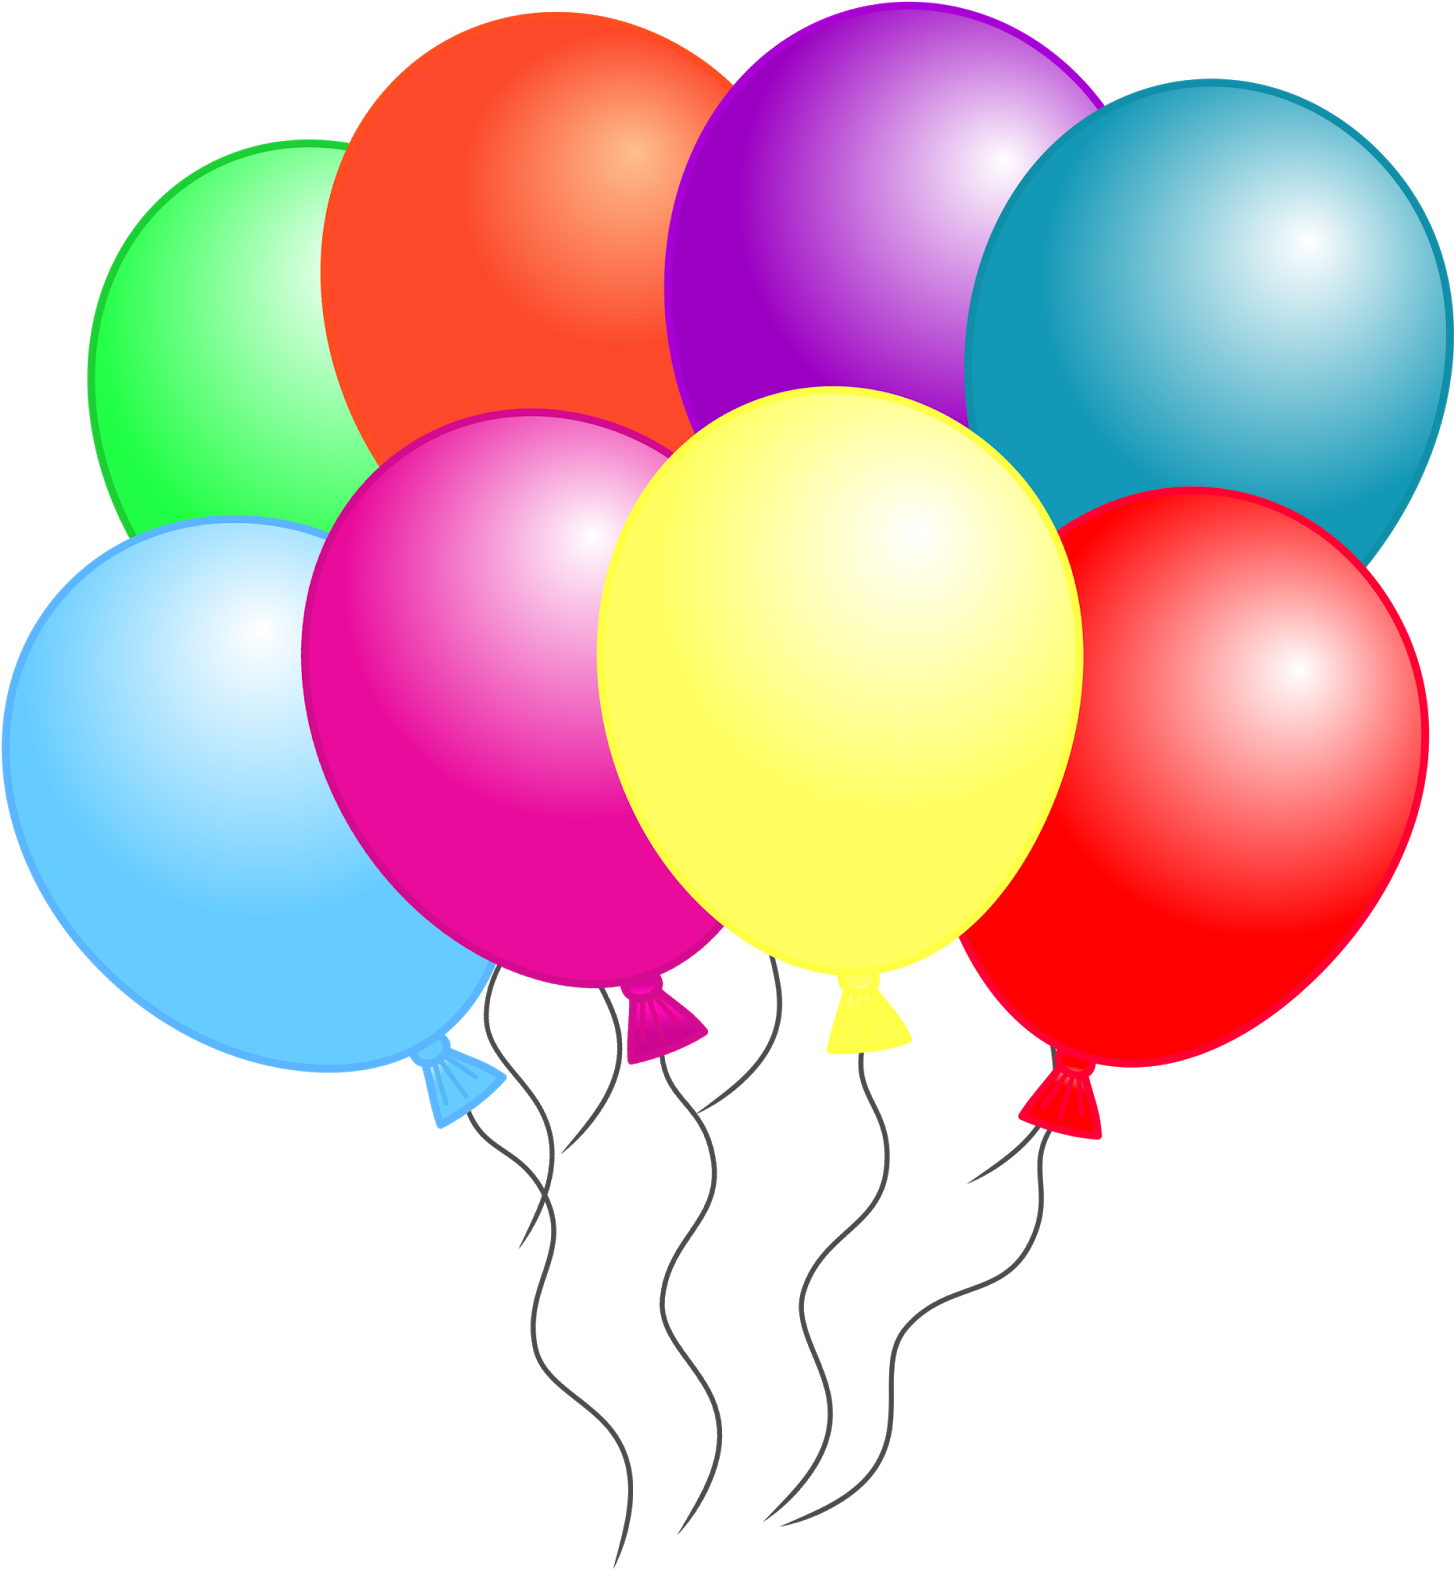 Balloon Clipart That Can Be Downloaded Individually - 8 Balloons Clipart (1488x1600)